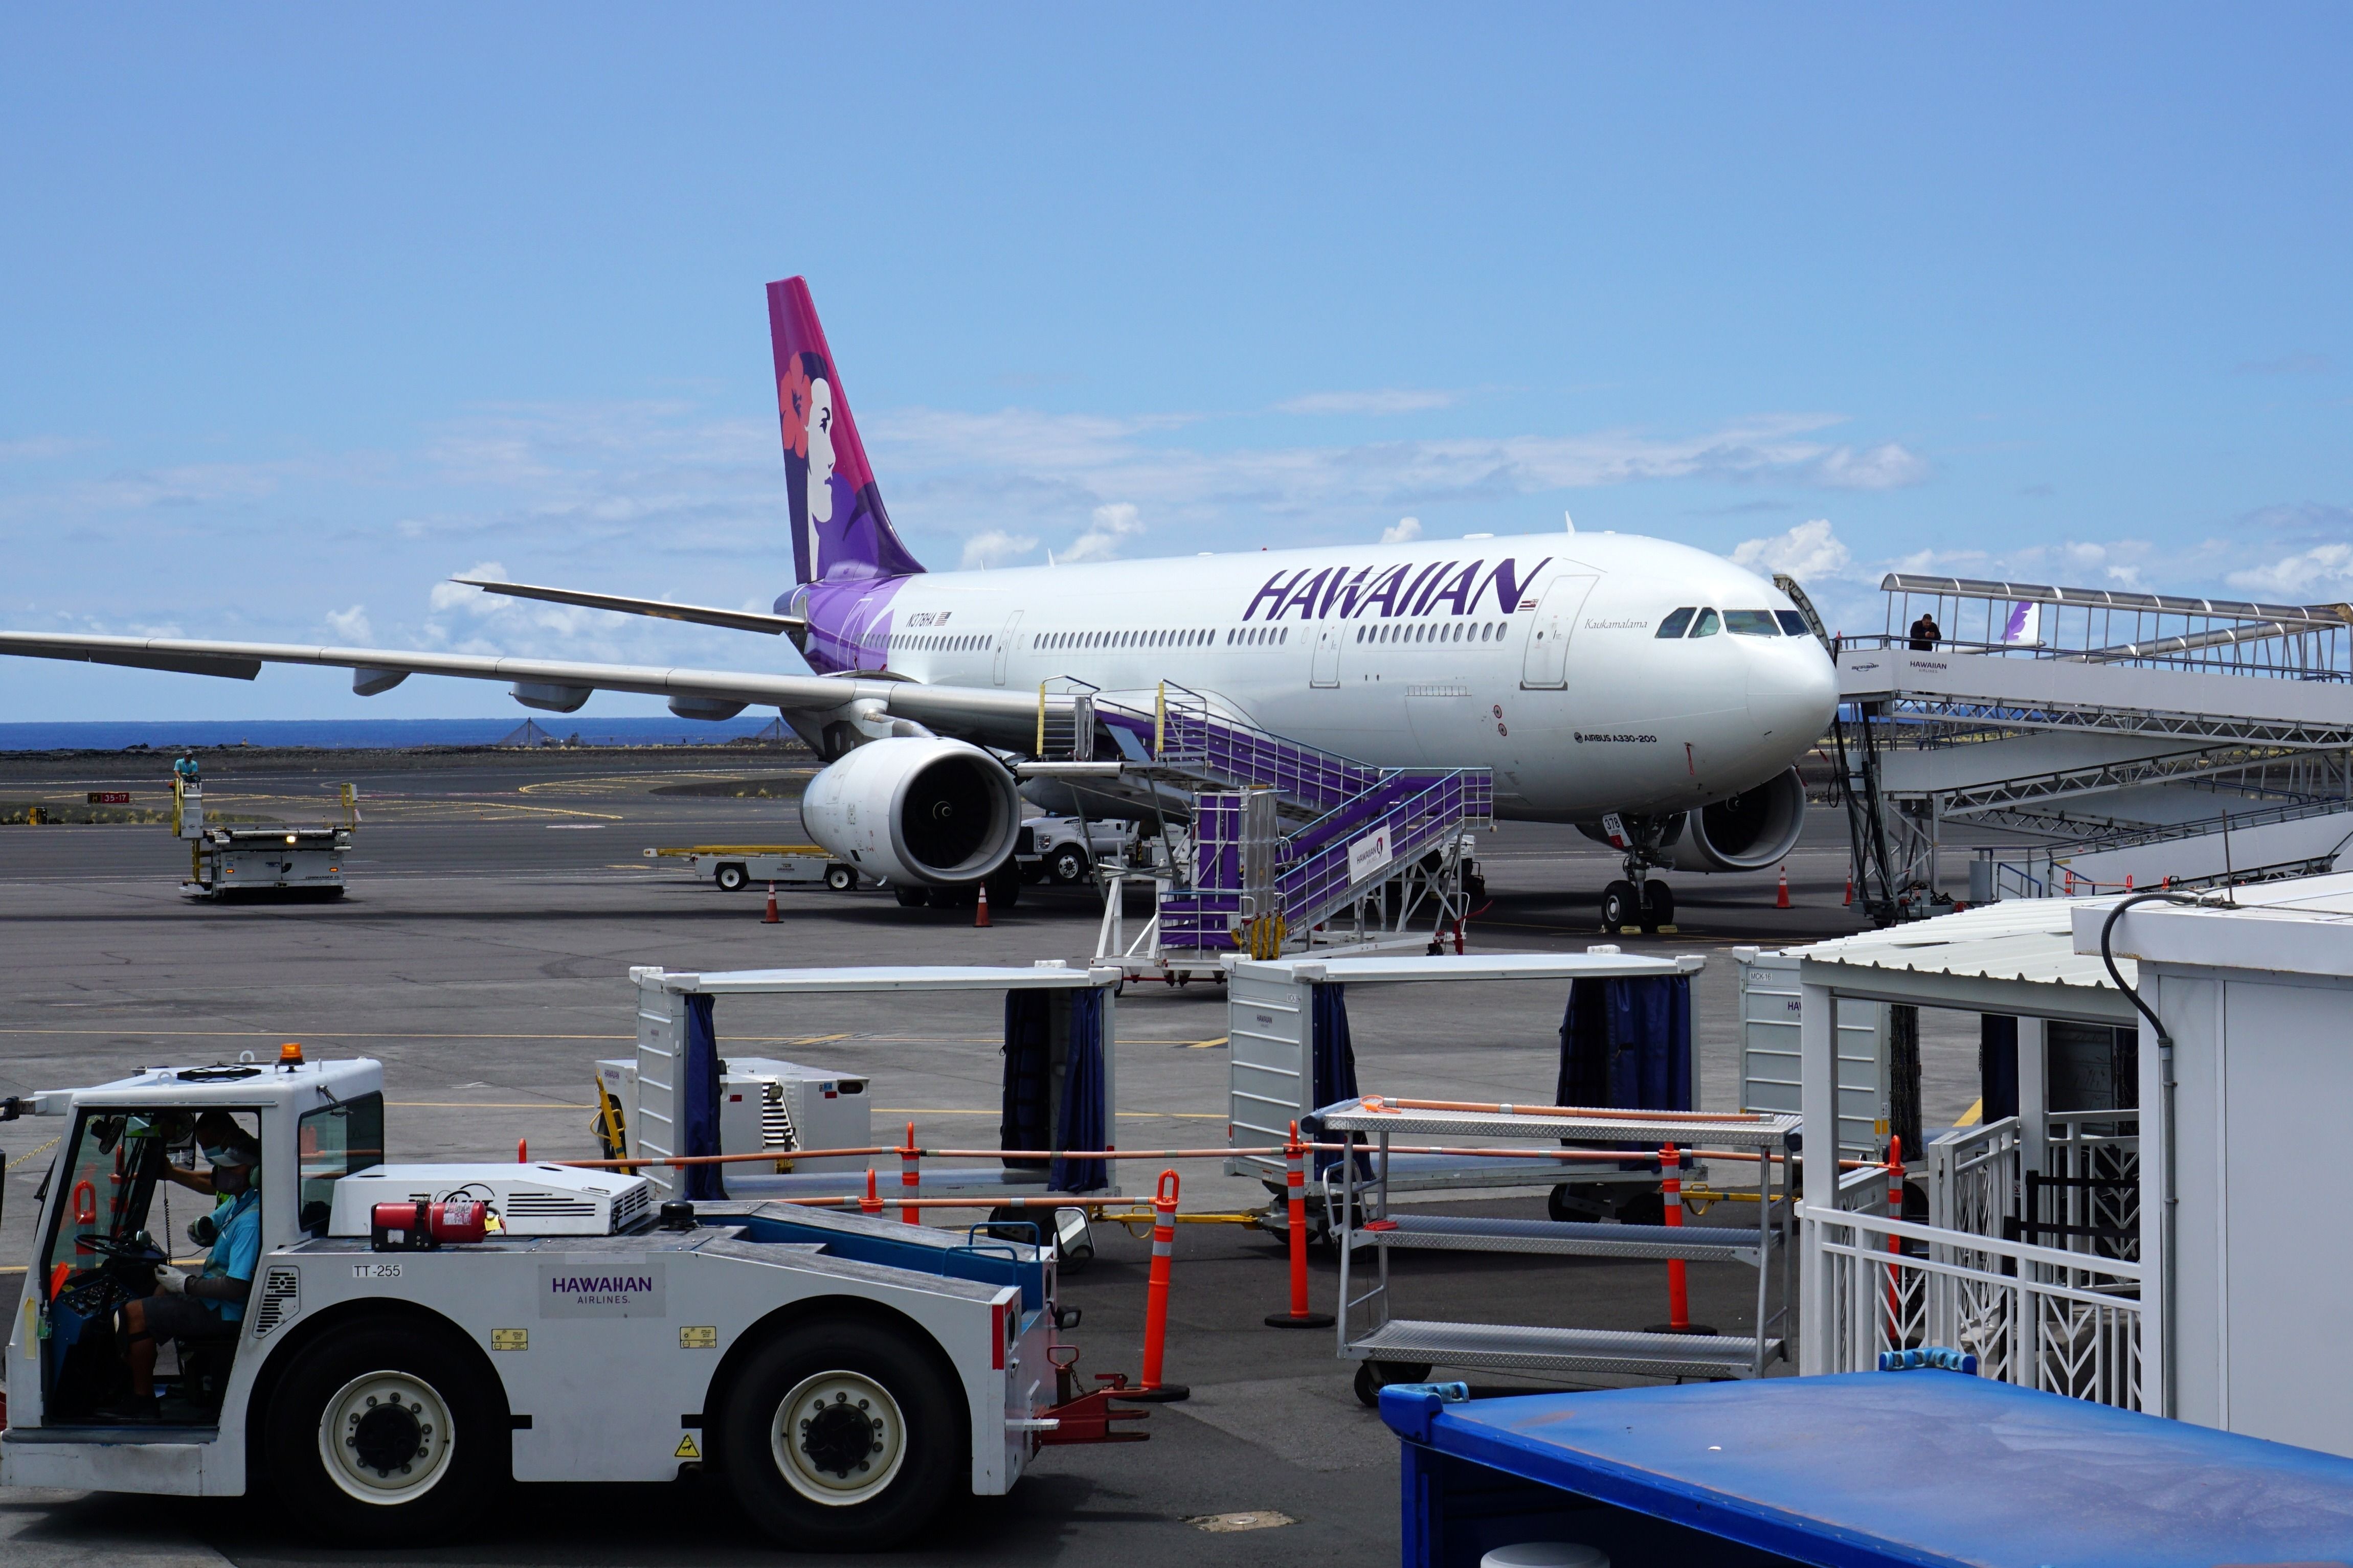 A Hawaiian Airlines A330-200 on the apron at Kona International Airport.